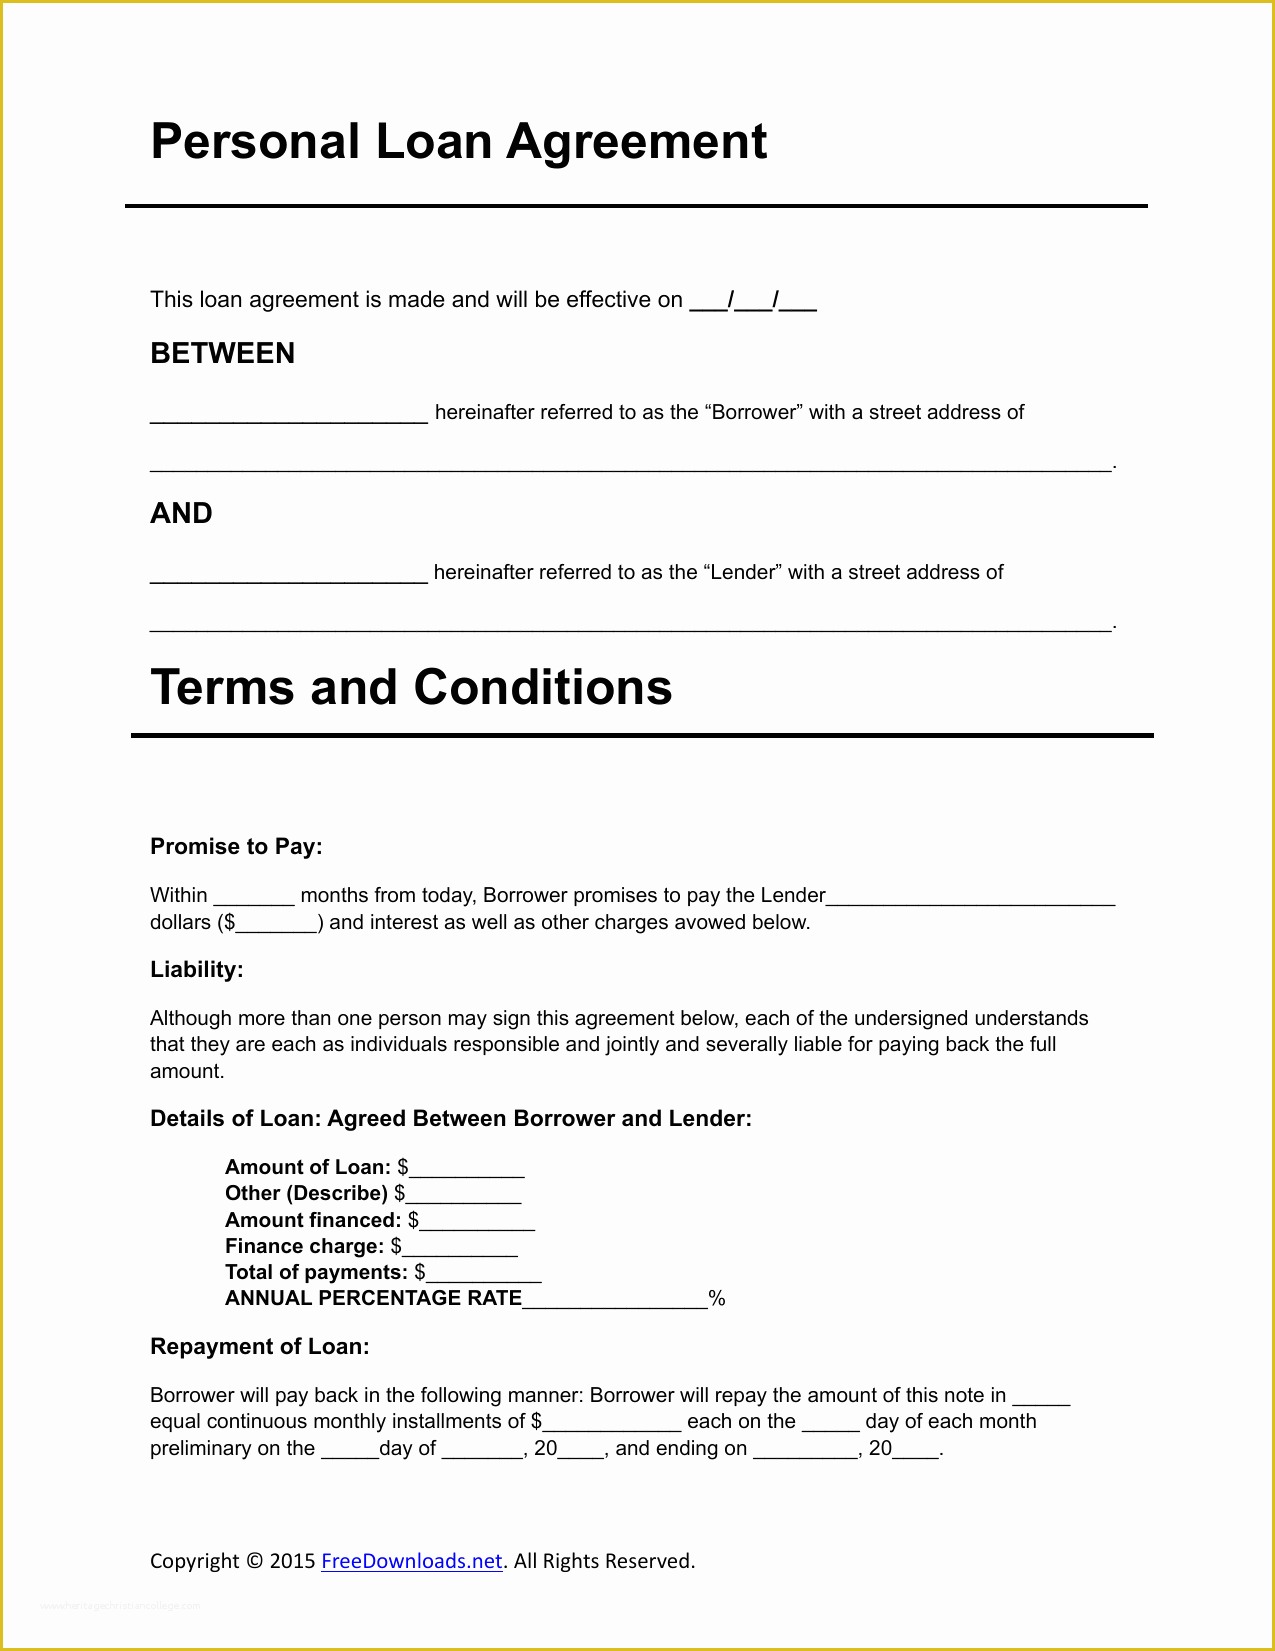 Free Online Loan Agreement Template Of Download Personal Loan Agreement Template Pdf